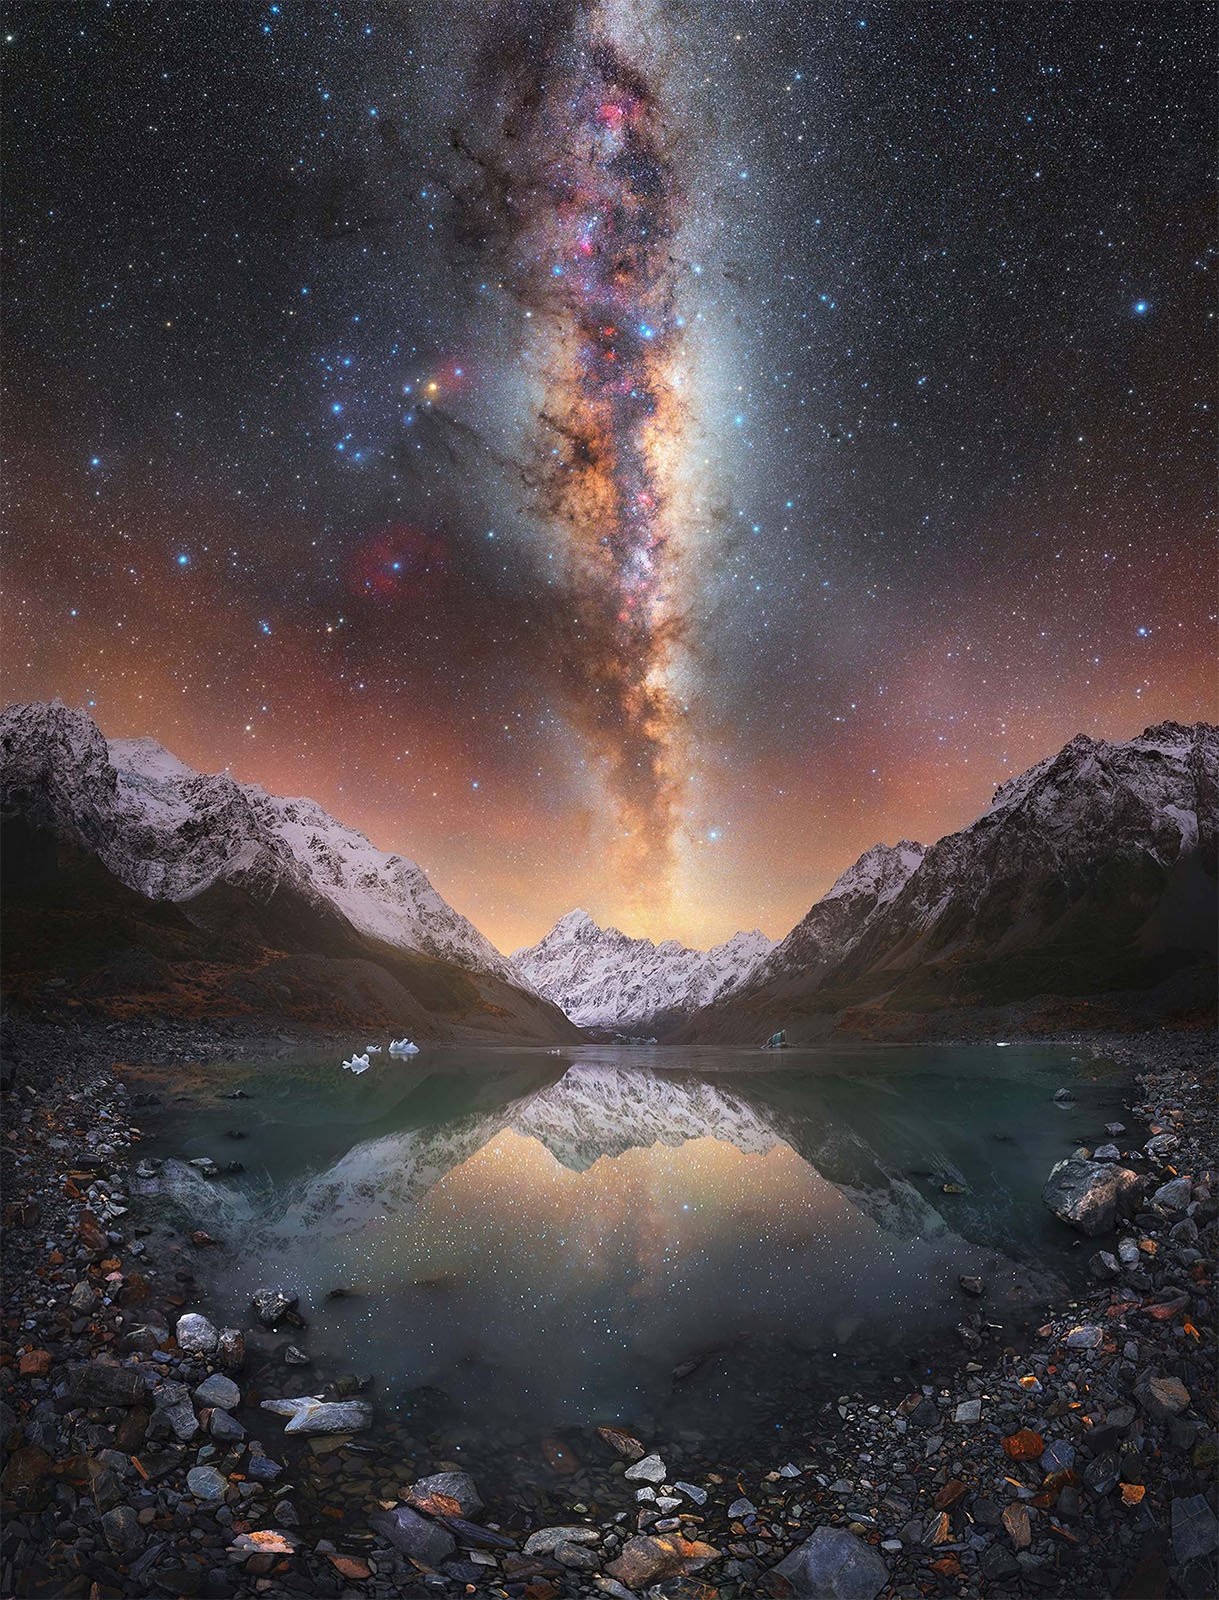 A stunning night sky filled with stars and the Milky Way stretches vertically over snow-capped mountains that are reflected in a clear, calm lake below. The scene is serene, with rocky terrain in the foreground leading to the tranquil waters and majestic peaks.